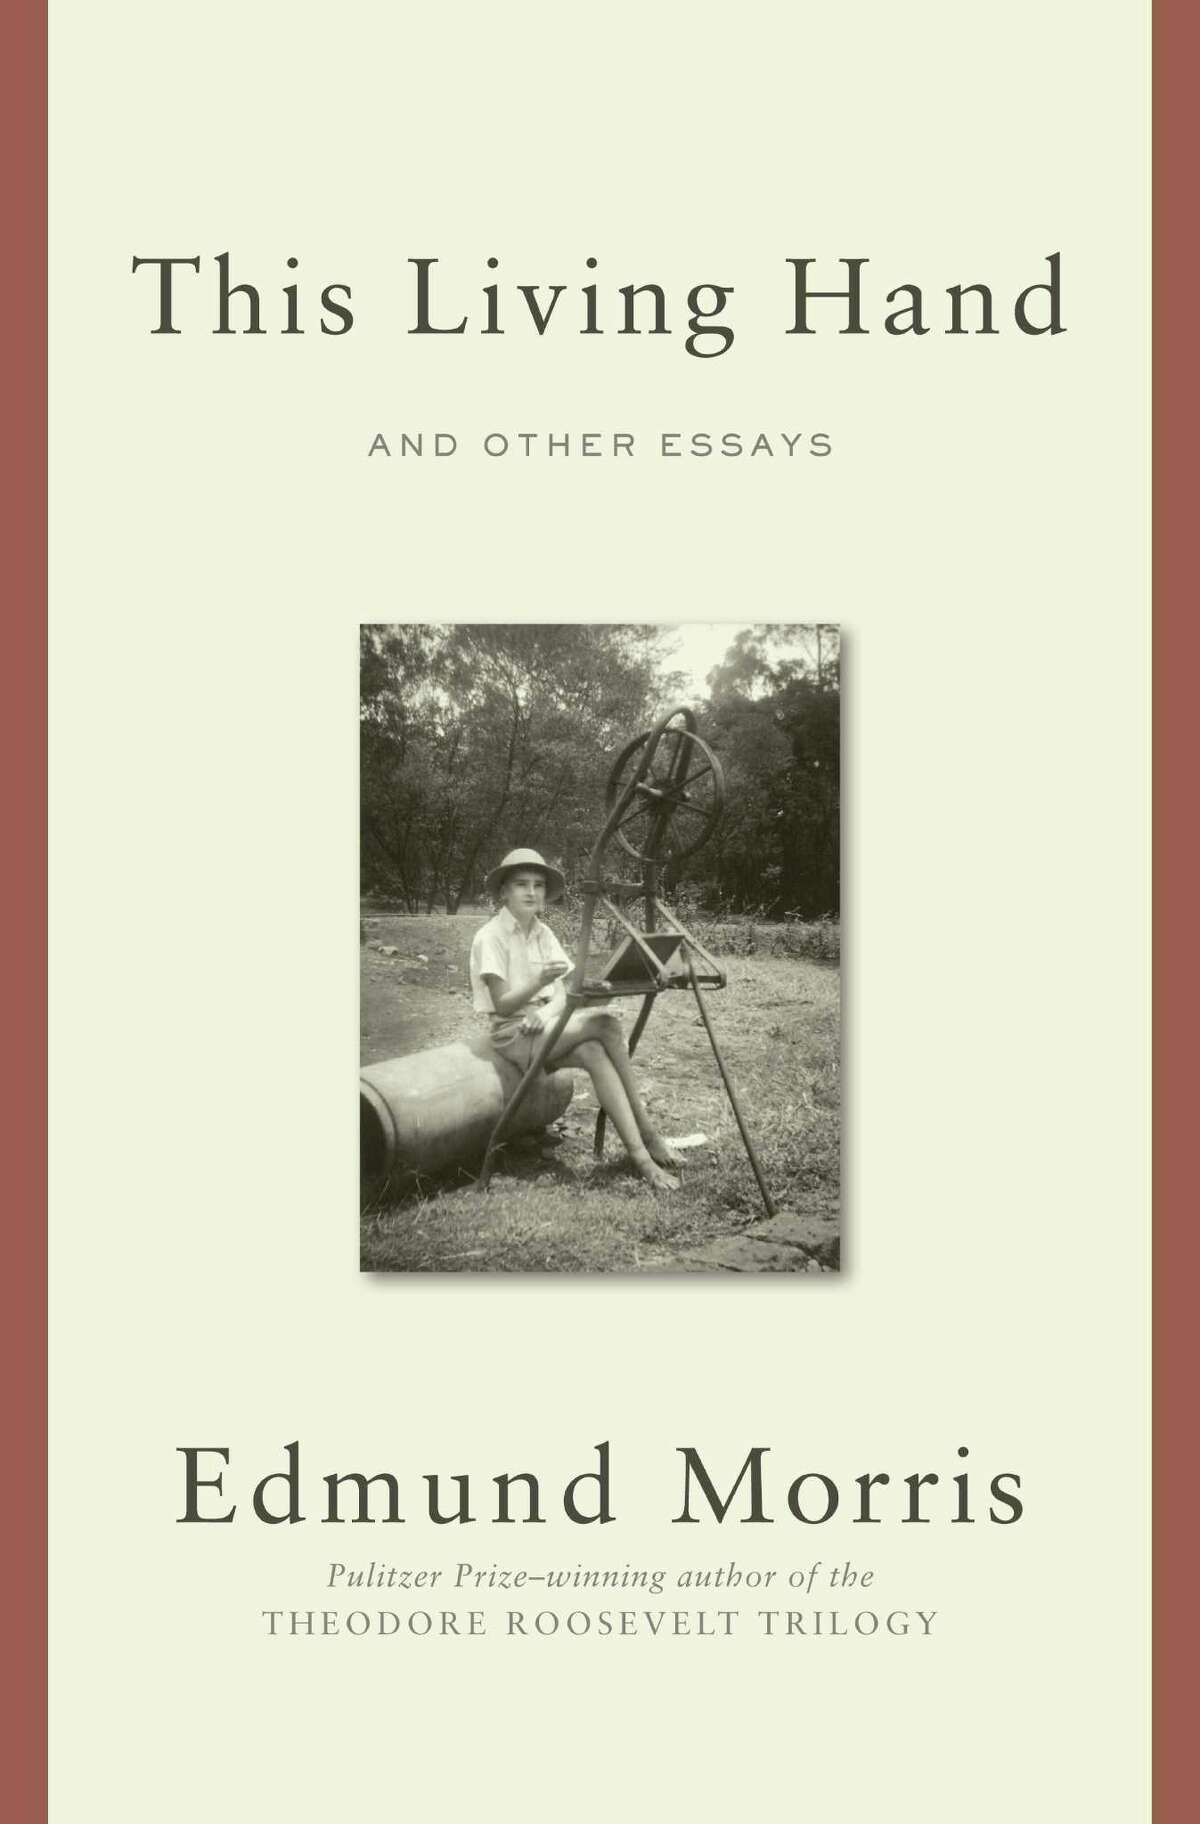 World-renowned author and Kent resident Edmund Morris' new book, " This Living Hand: And Other Essays," is a collection of pieces about literature and music, as well as various biographical subjects.